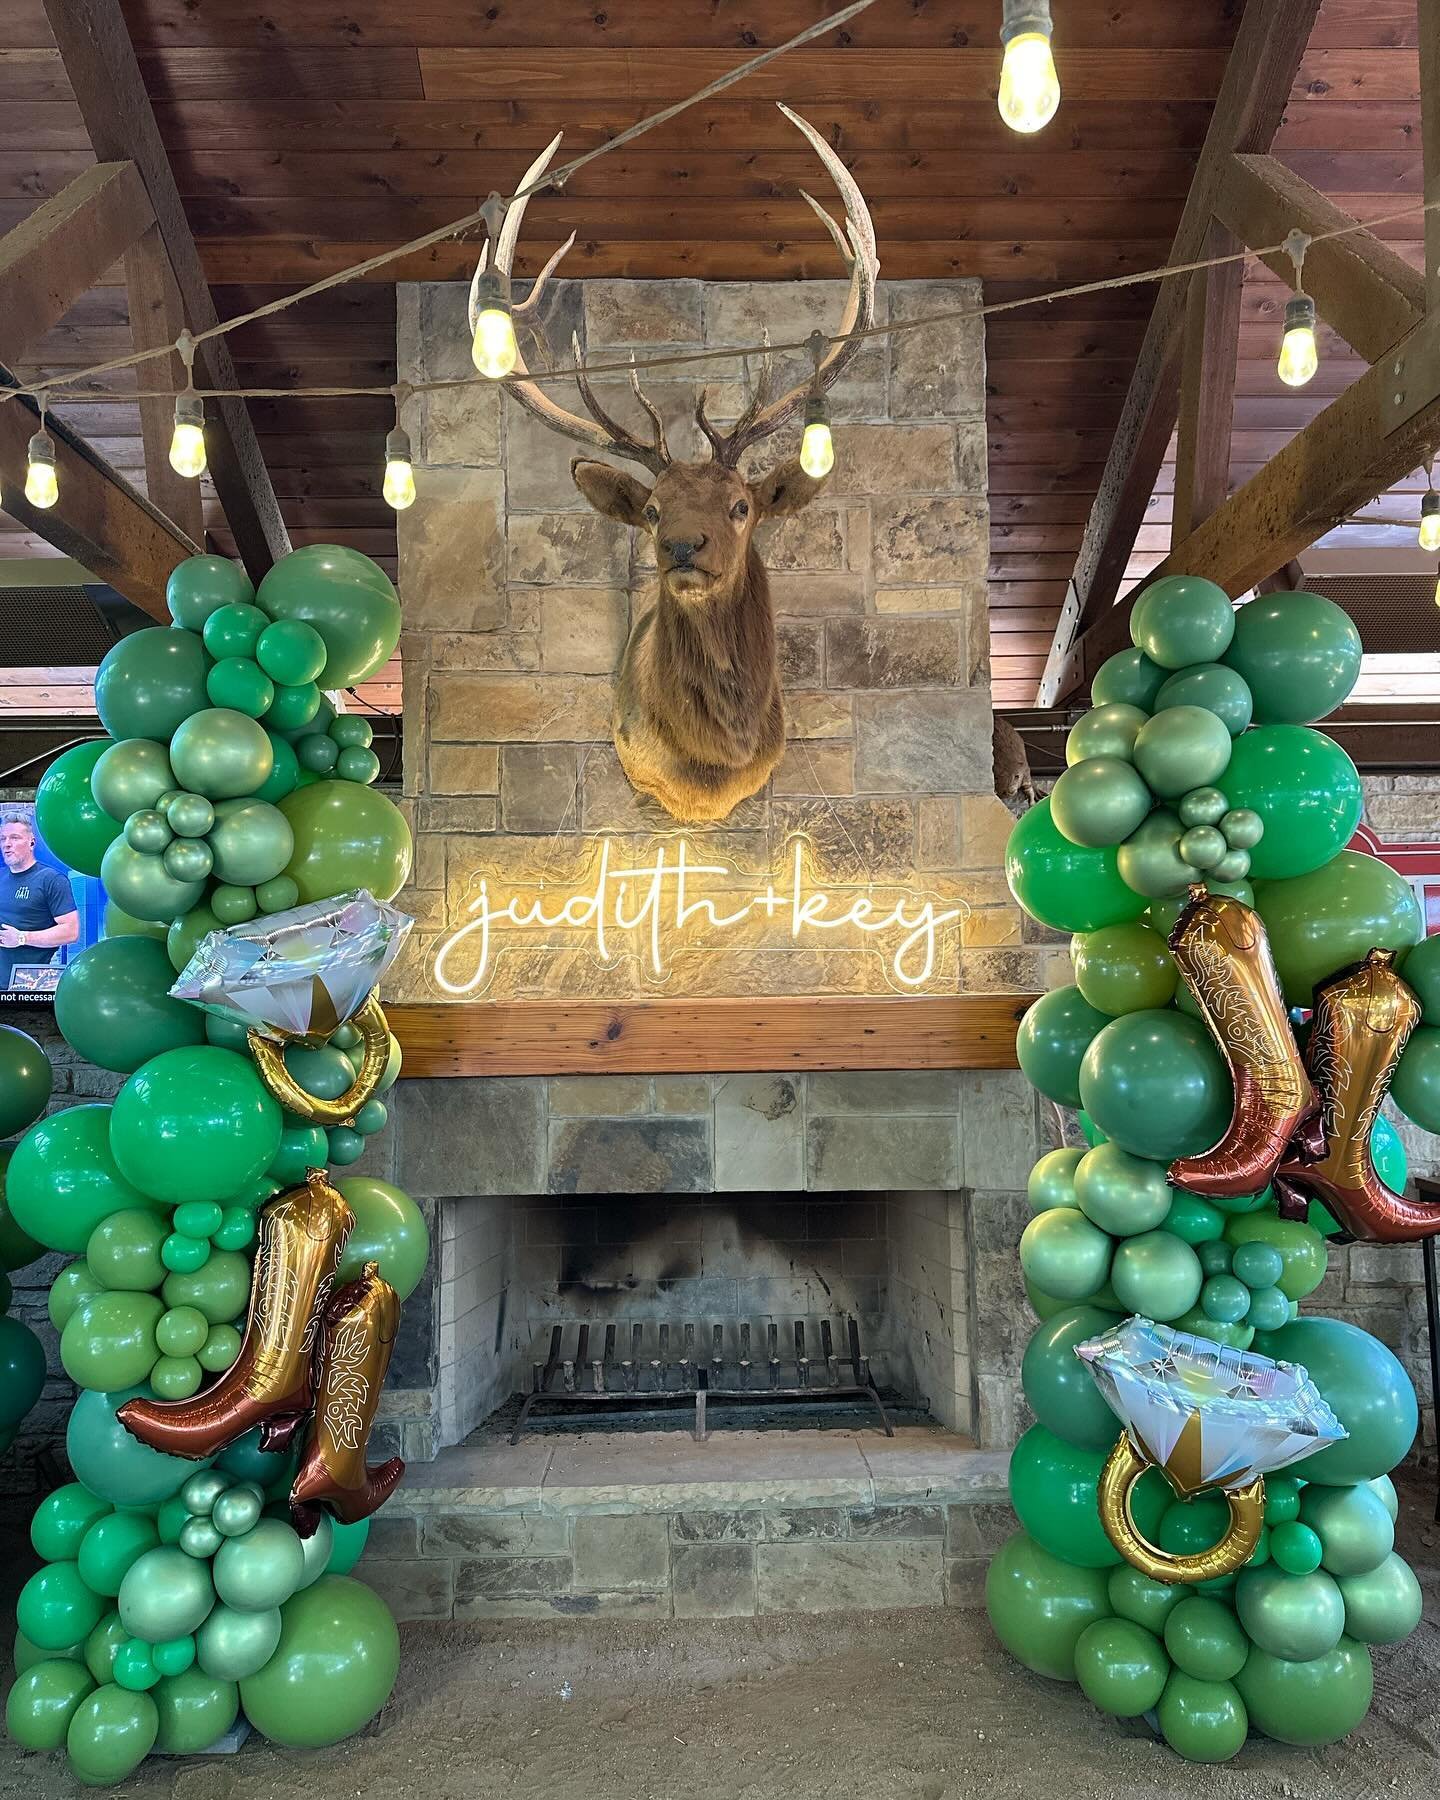 Boots, Bling 💍, and Green Green Green! 
Congrats on your engagement Judith &amp; Key!
#WesteenChicBalloons #TheKatyTrail #BalloonInspo